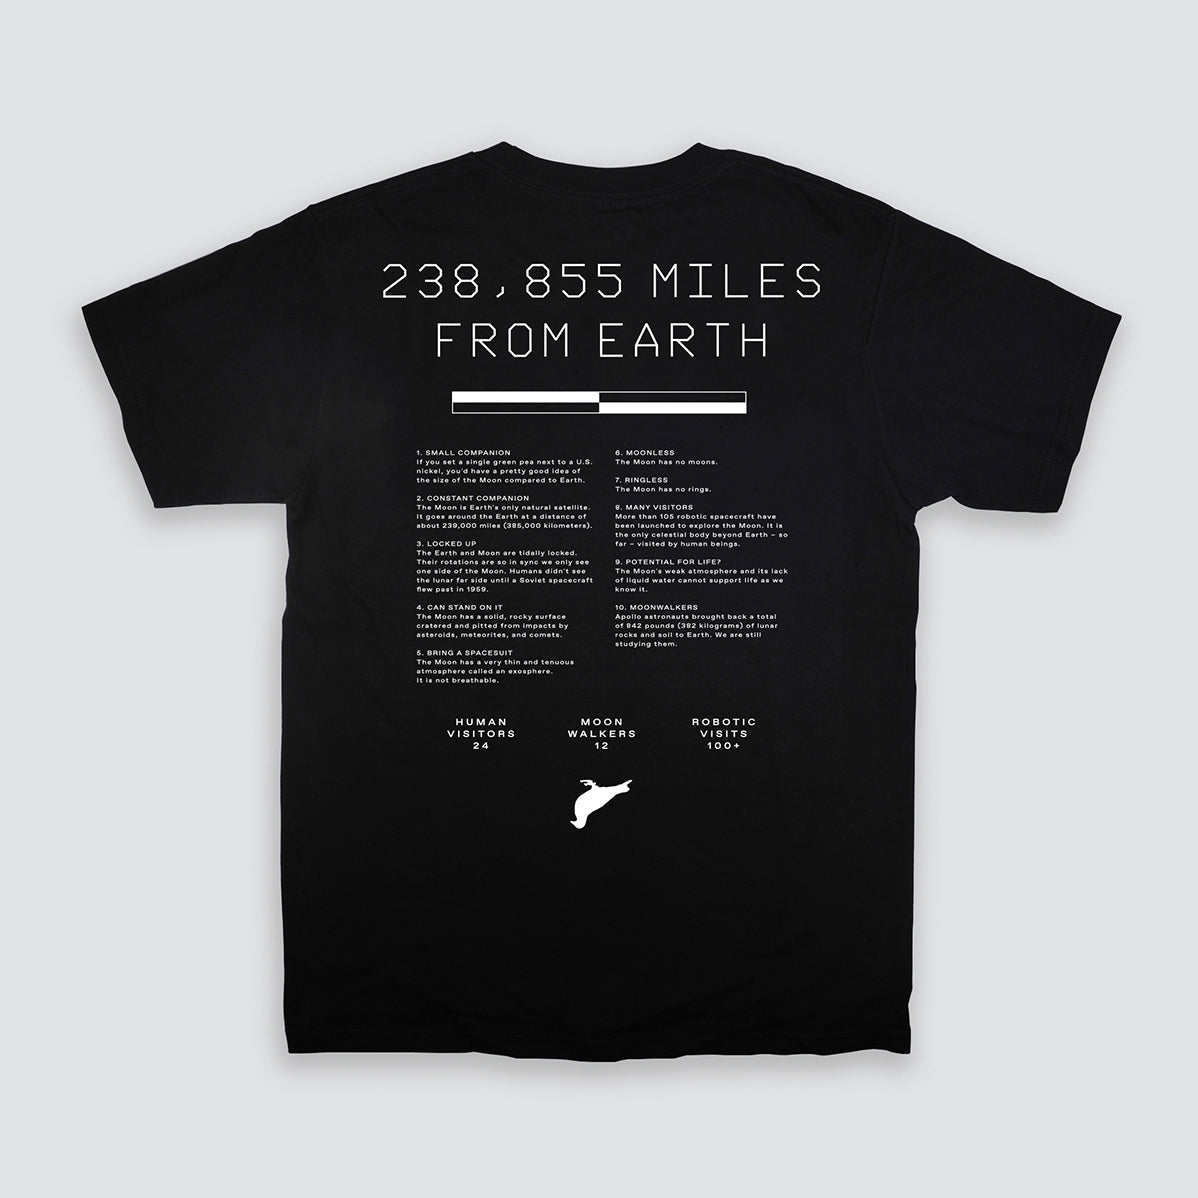 Featuring the upside down Zero Gravity Pigeon and the NASA logo, “Pigeon Moon T” displays 10 facts about our neighbor – the Moon from 238,855 miles afar. The logo of PROJECT ARTEMIS is sewed on the left sleeve, balanced by the graphical roll patterns of spacecraft on the right sleeve. The heavyweight tee is only available in black color.